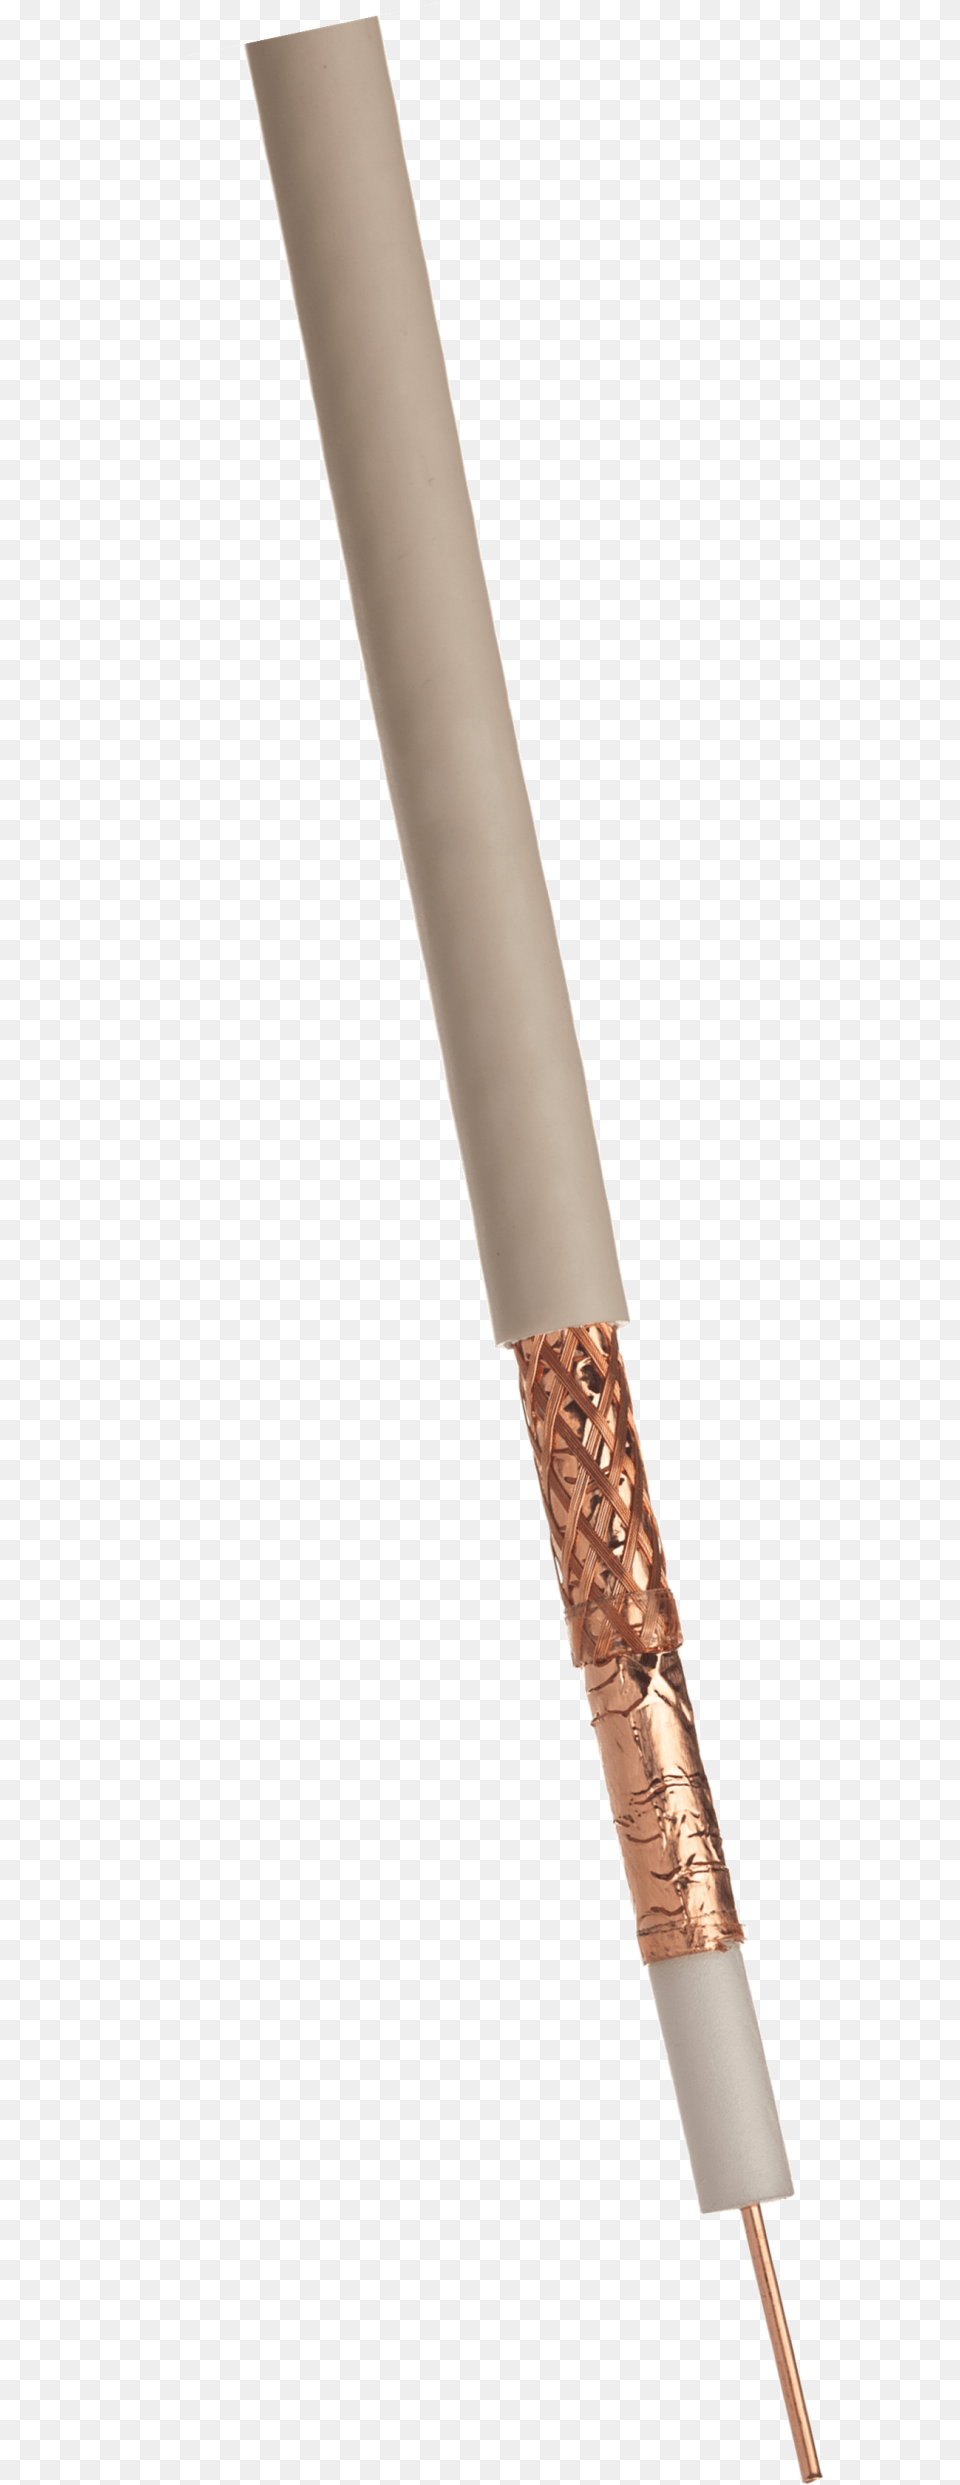 Coaxial Cable, Mace Club, Weapon Png